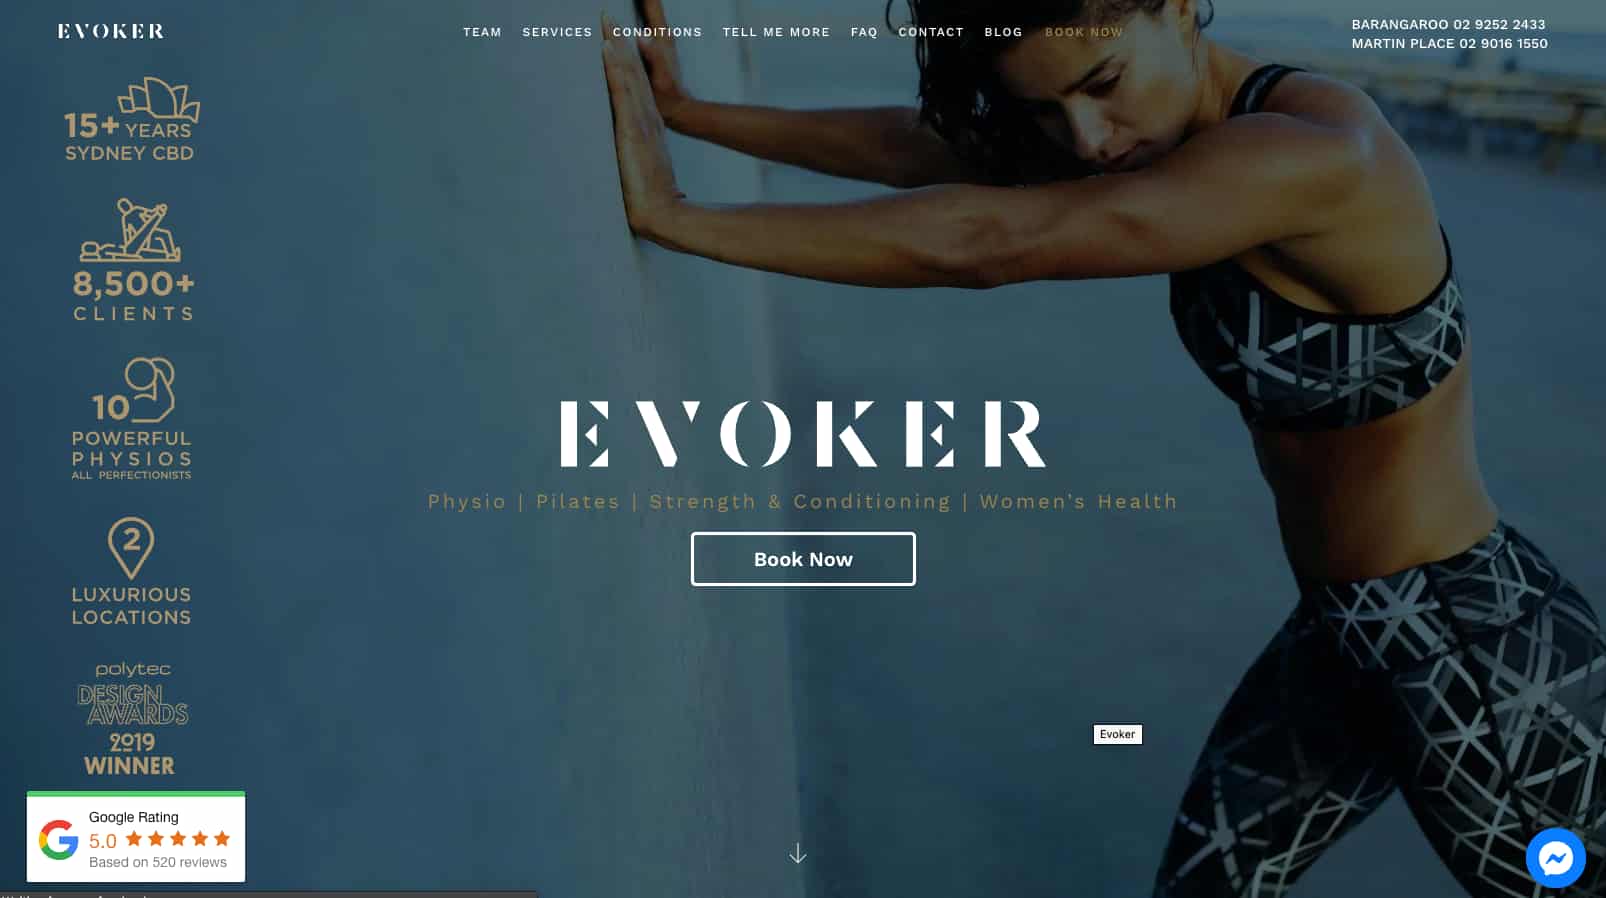 Evoker Premium Physiotherapy Services